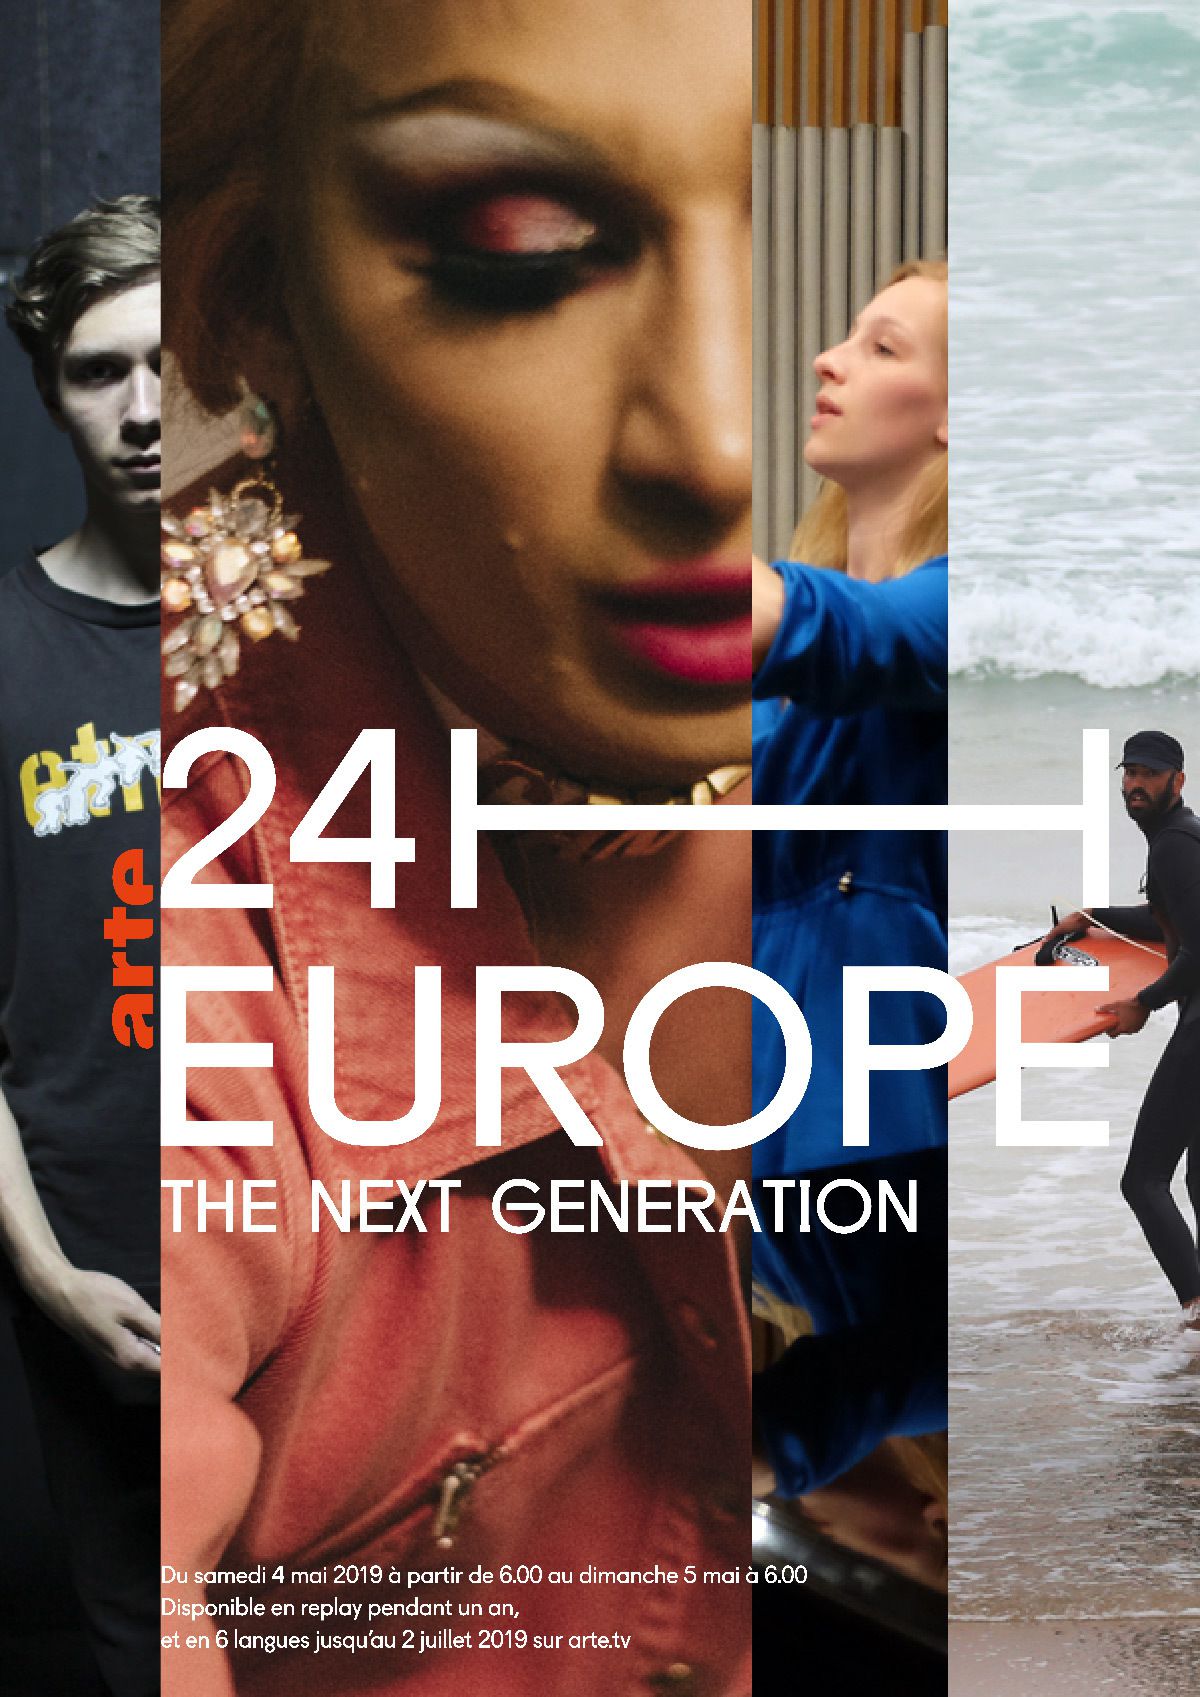 24h Europe – The Next Generation - Documentaire (2019) streaming VF gratuit complet